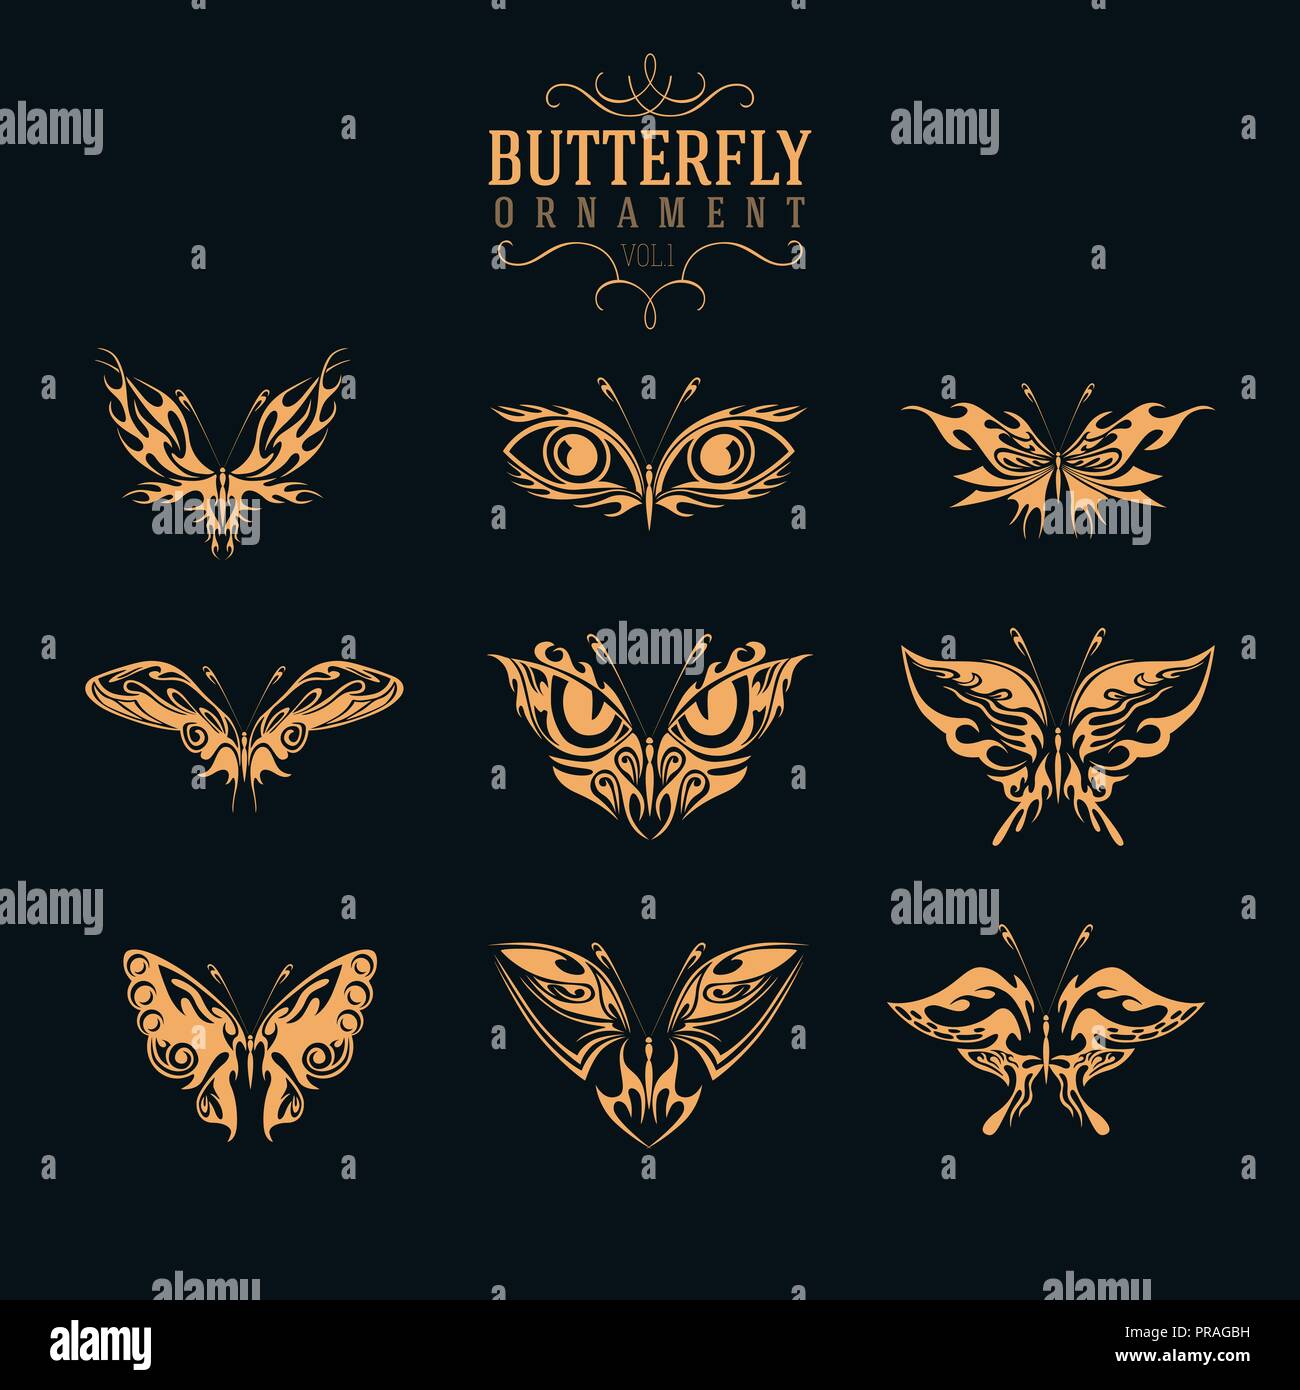 butterfly ornament set Stock Vector